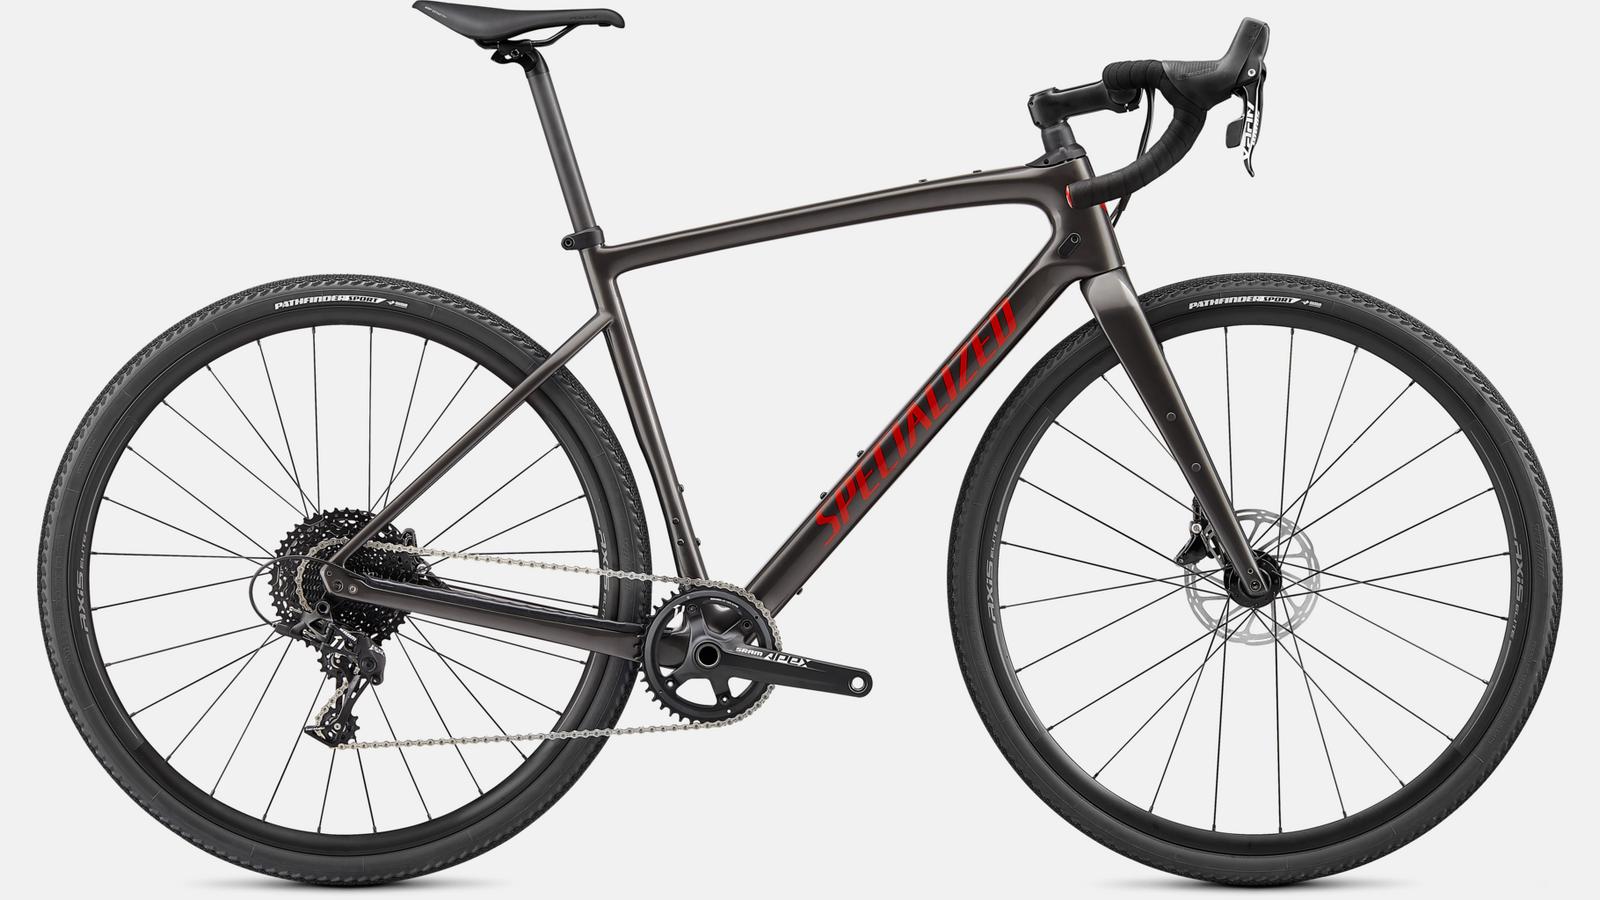 Paint for 2021 Specialized Diverge Base Carbon - Gloss Smoke